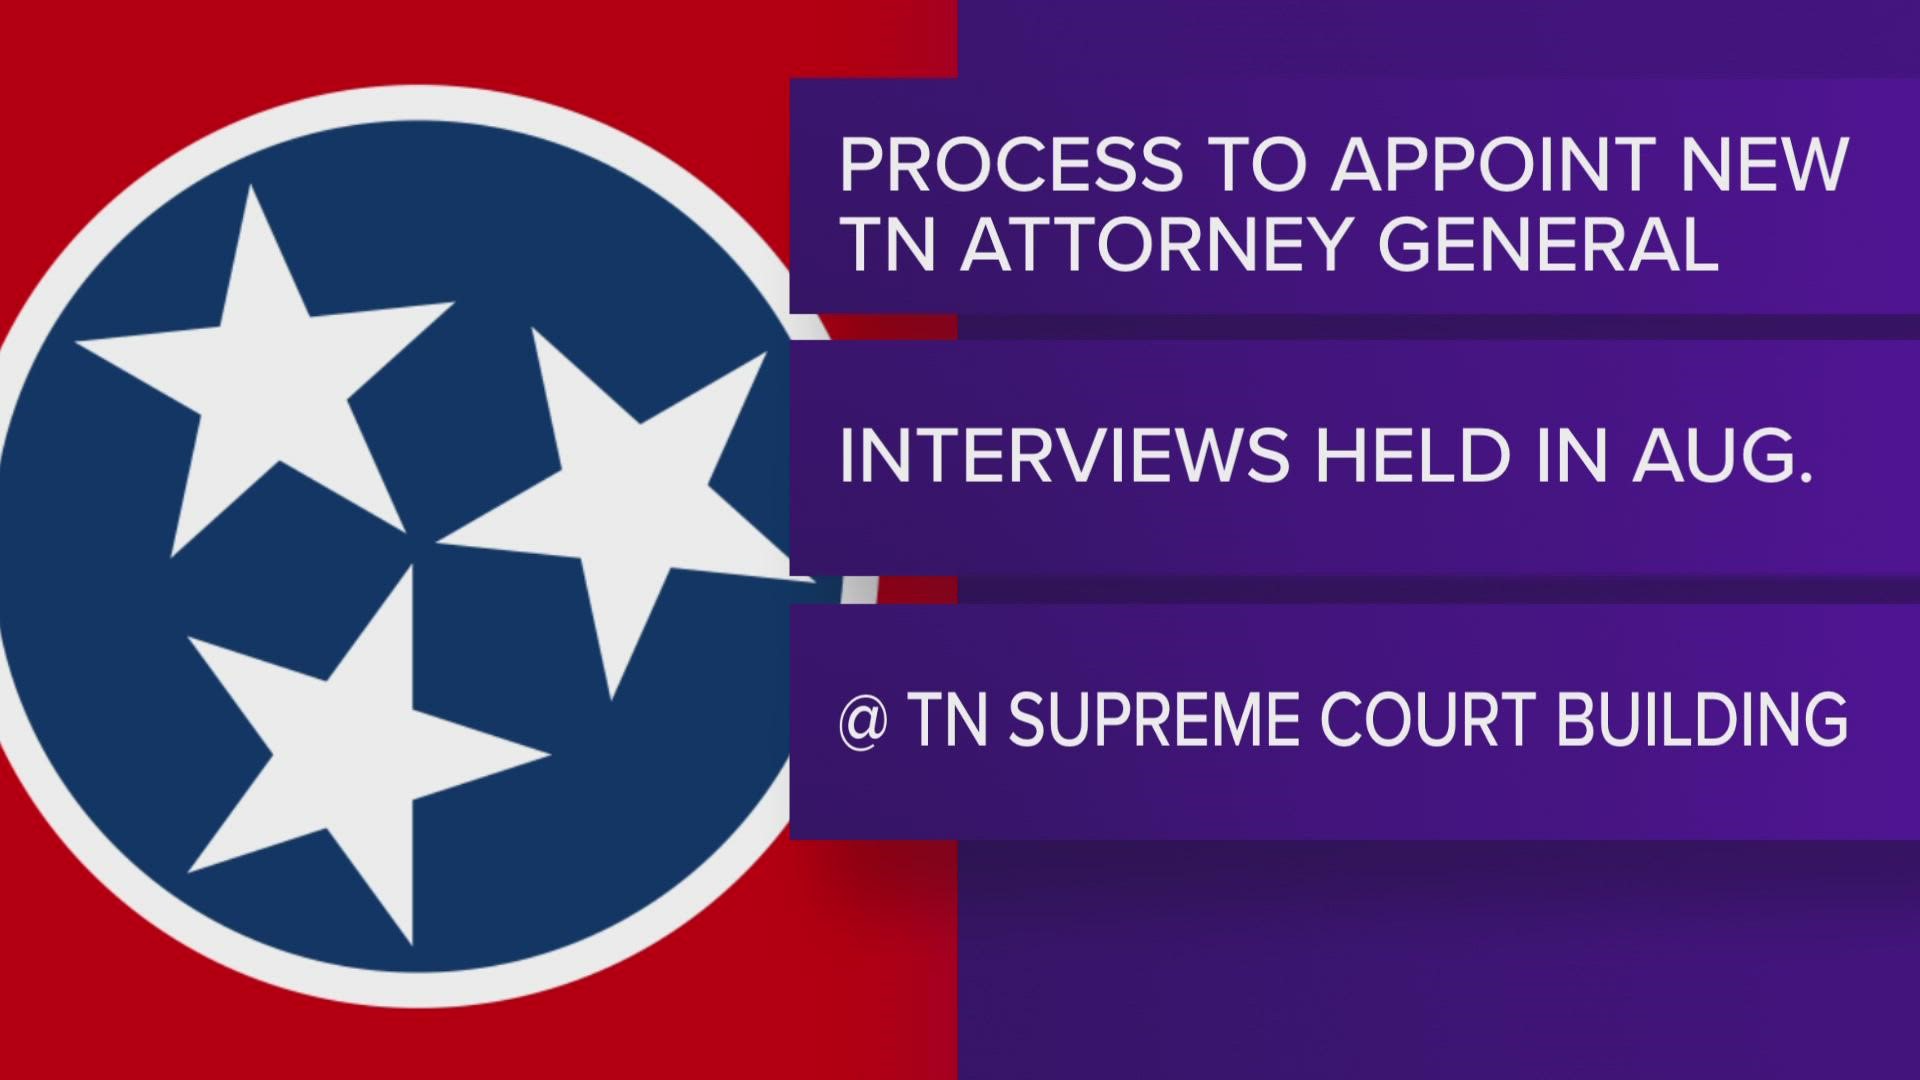 Tennessee is the only state where an attorney general is appointed by the supreme court. Interviews for Herbert Slatery's replacement will begin in August.